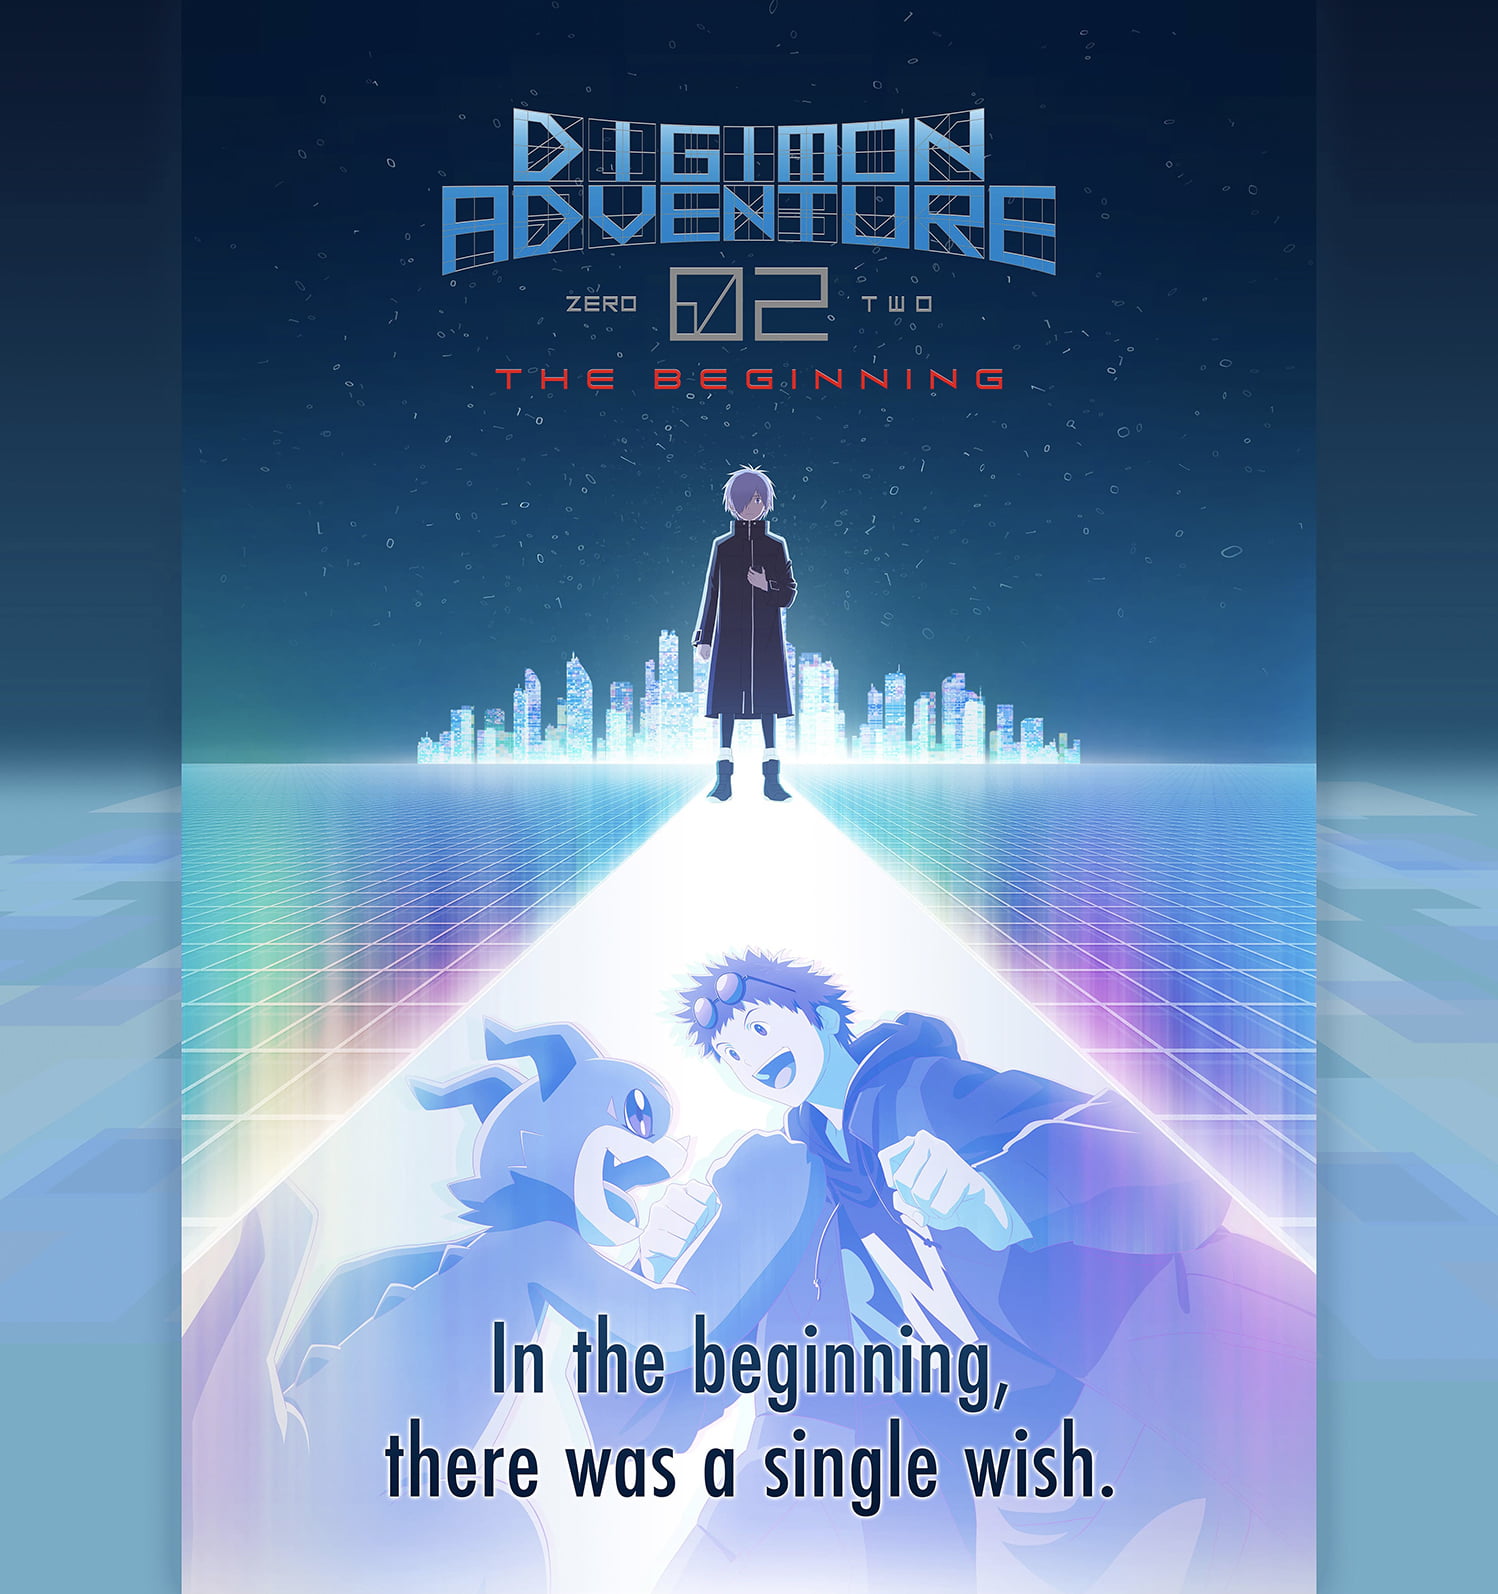 「Digimon Adventure 02 THE BEGINNING」Official website. In the beginning, there was a single wish.